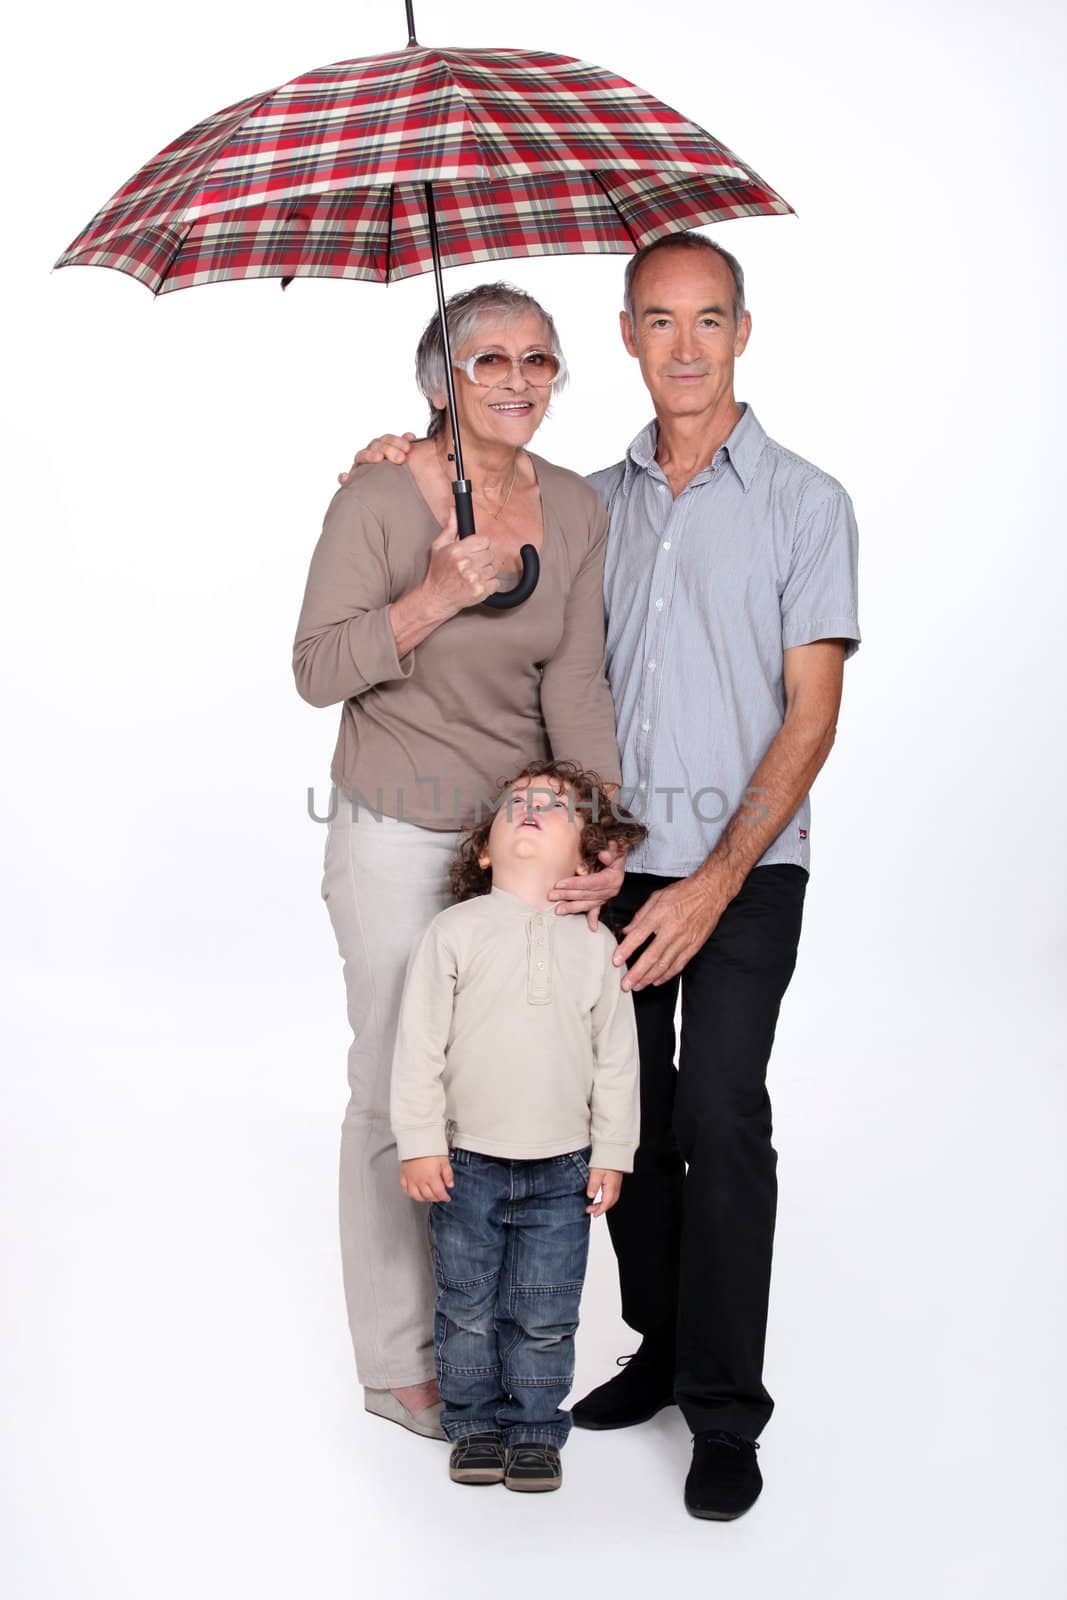 Grandparents and child with an umbrella by phovoir